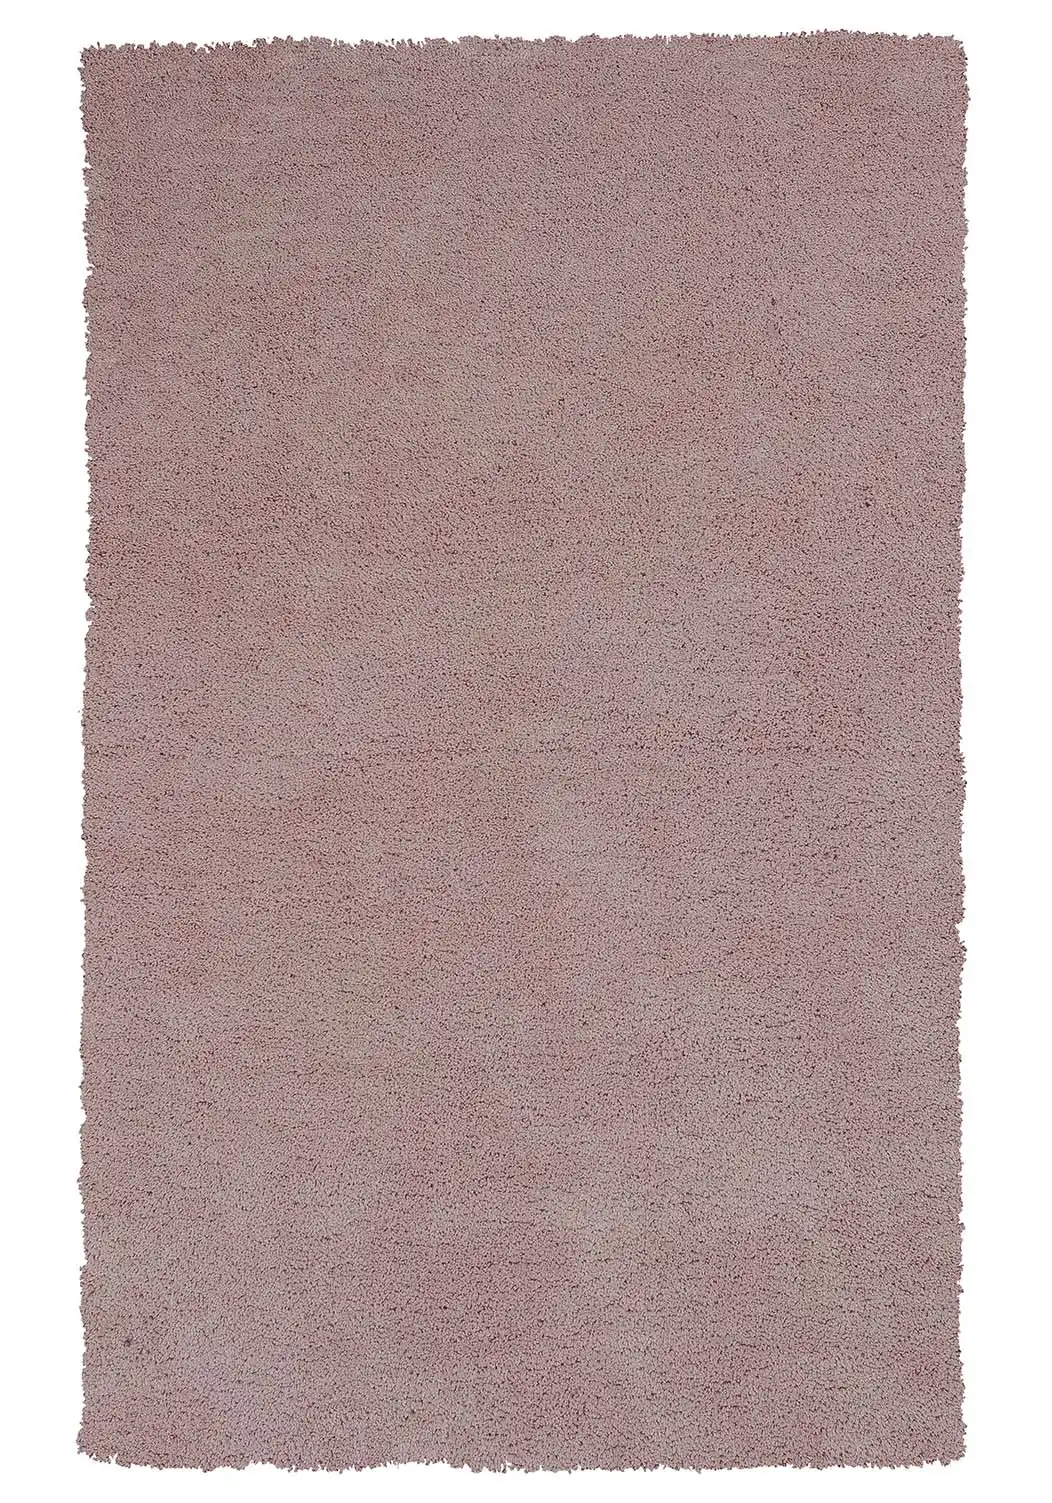 Bliss 1575 Rose Pink Shag Area Rug Product Image